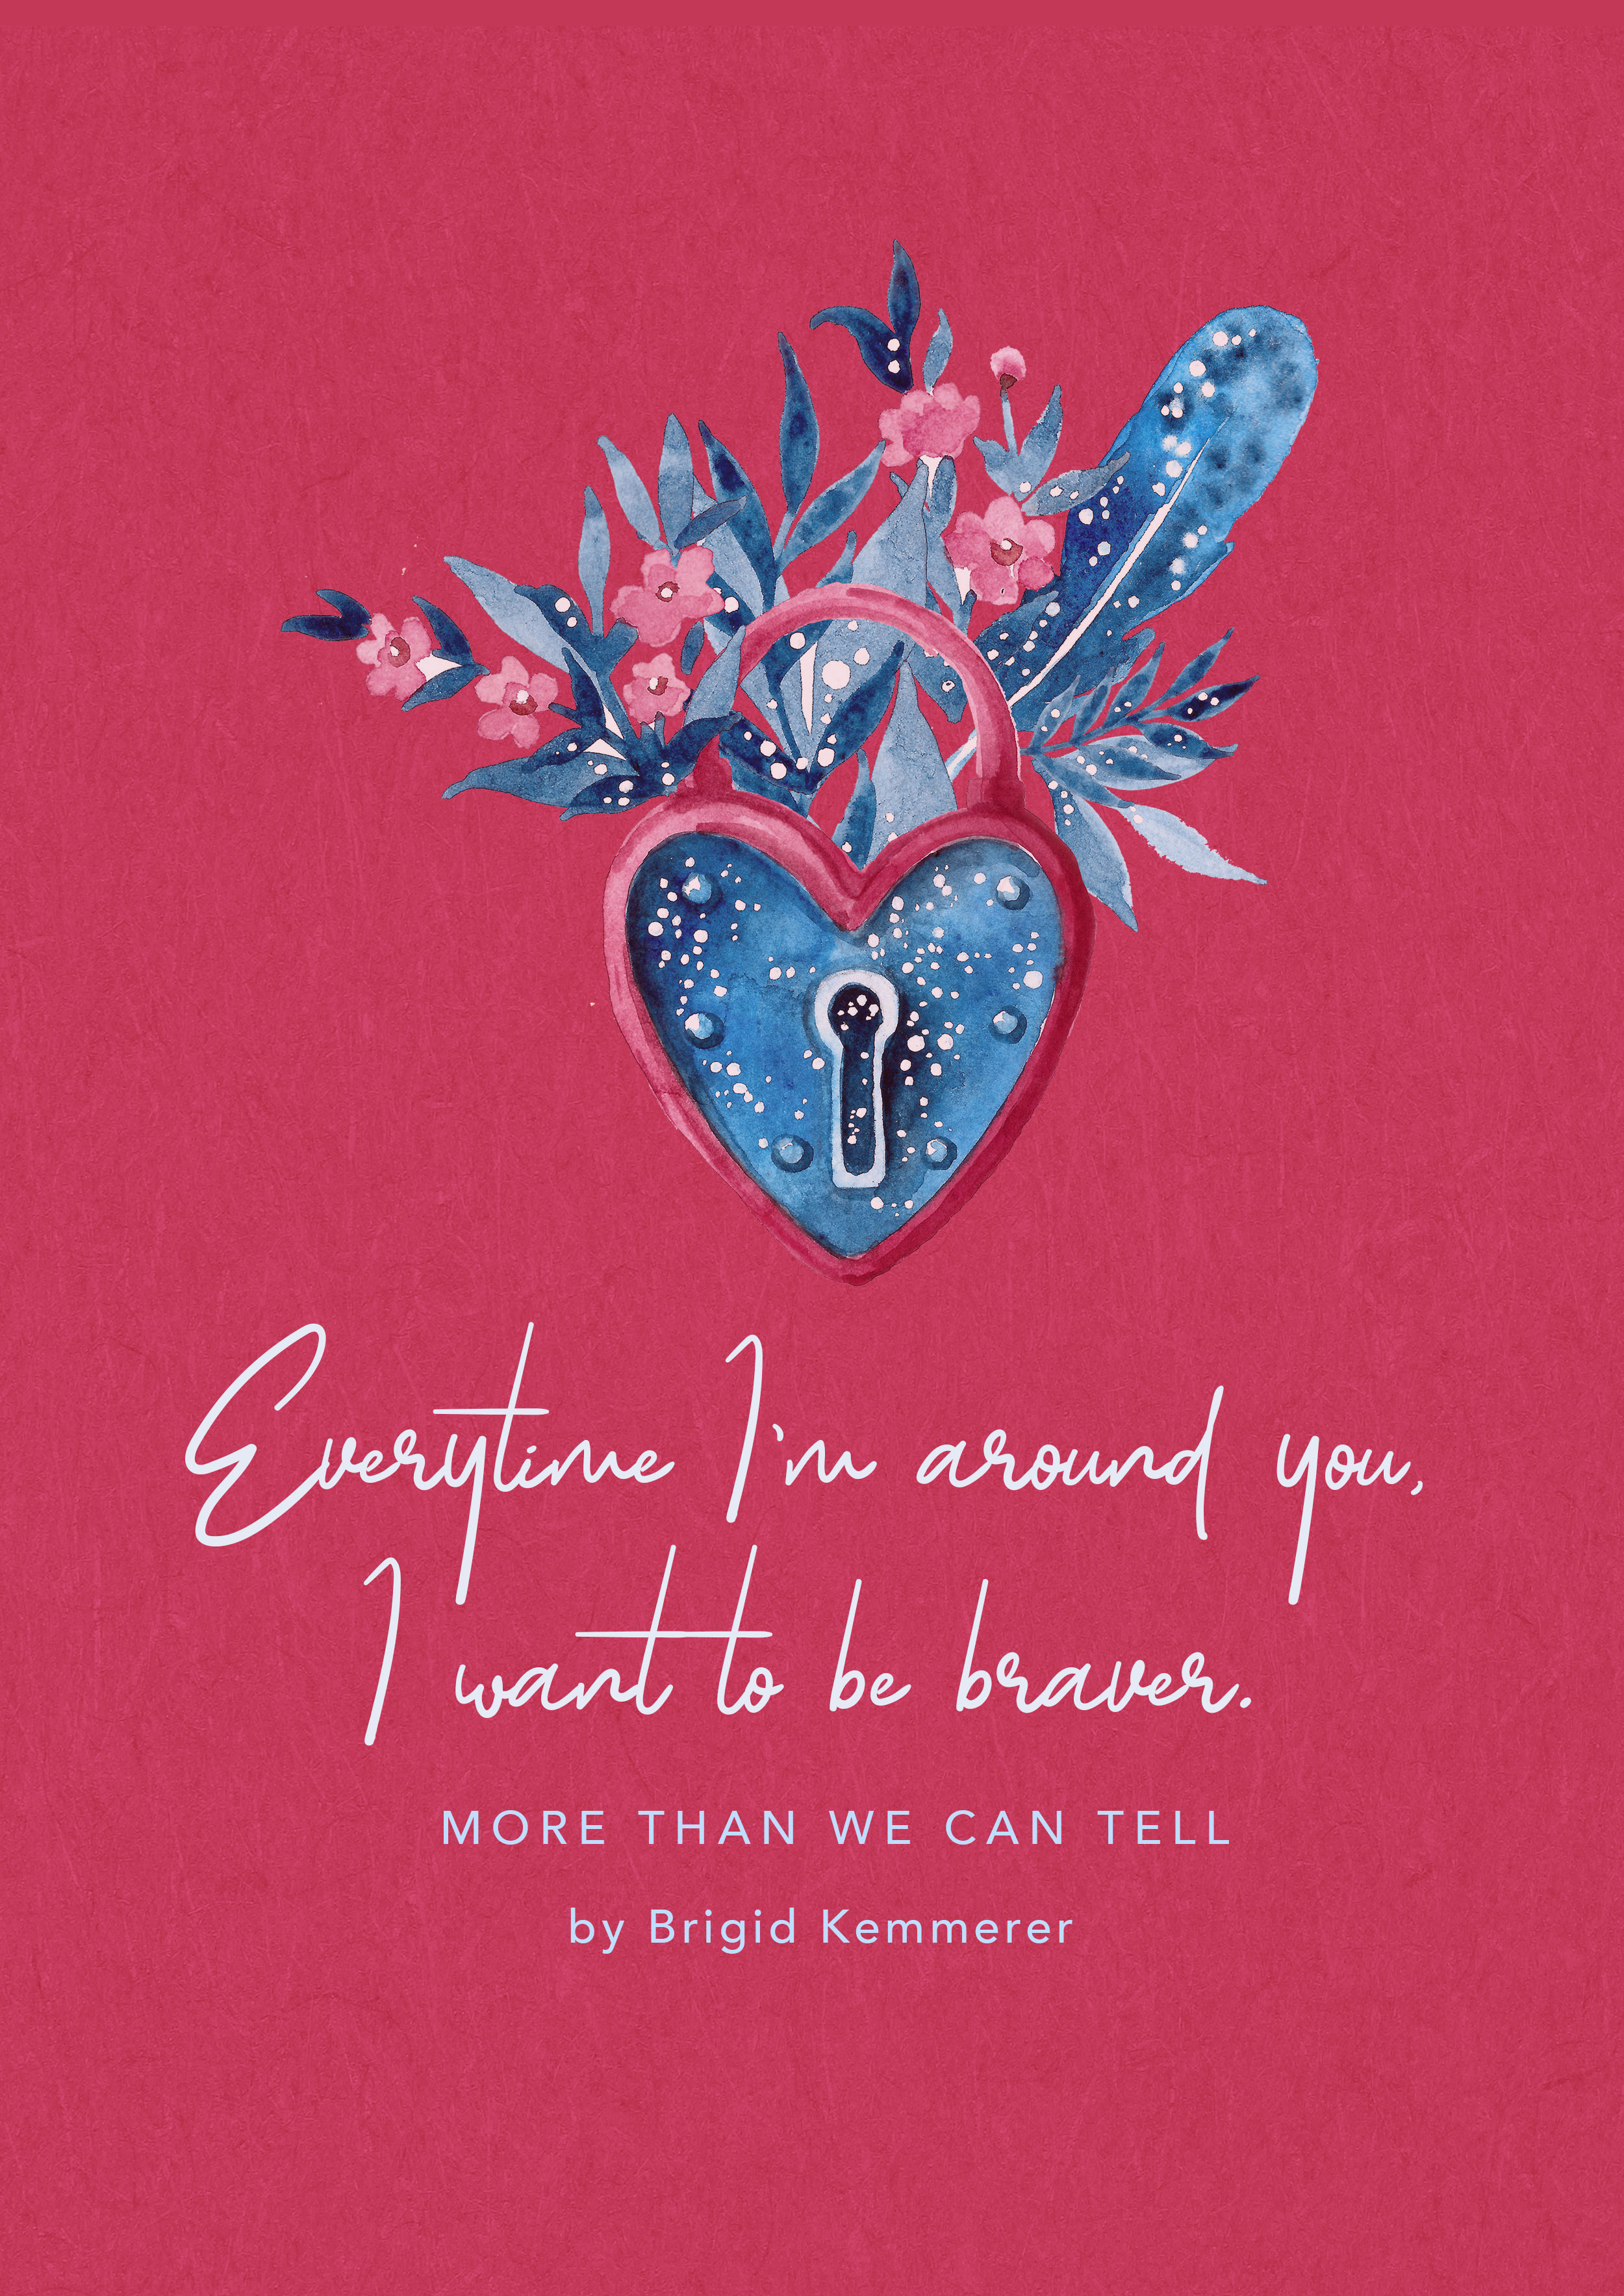 More Than We Can Tell by Brigid Kemmerer Quote Poster - Everytime Im around you I want to be braver